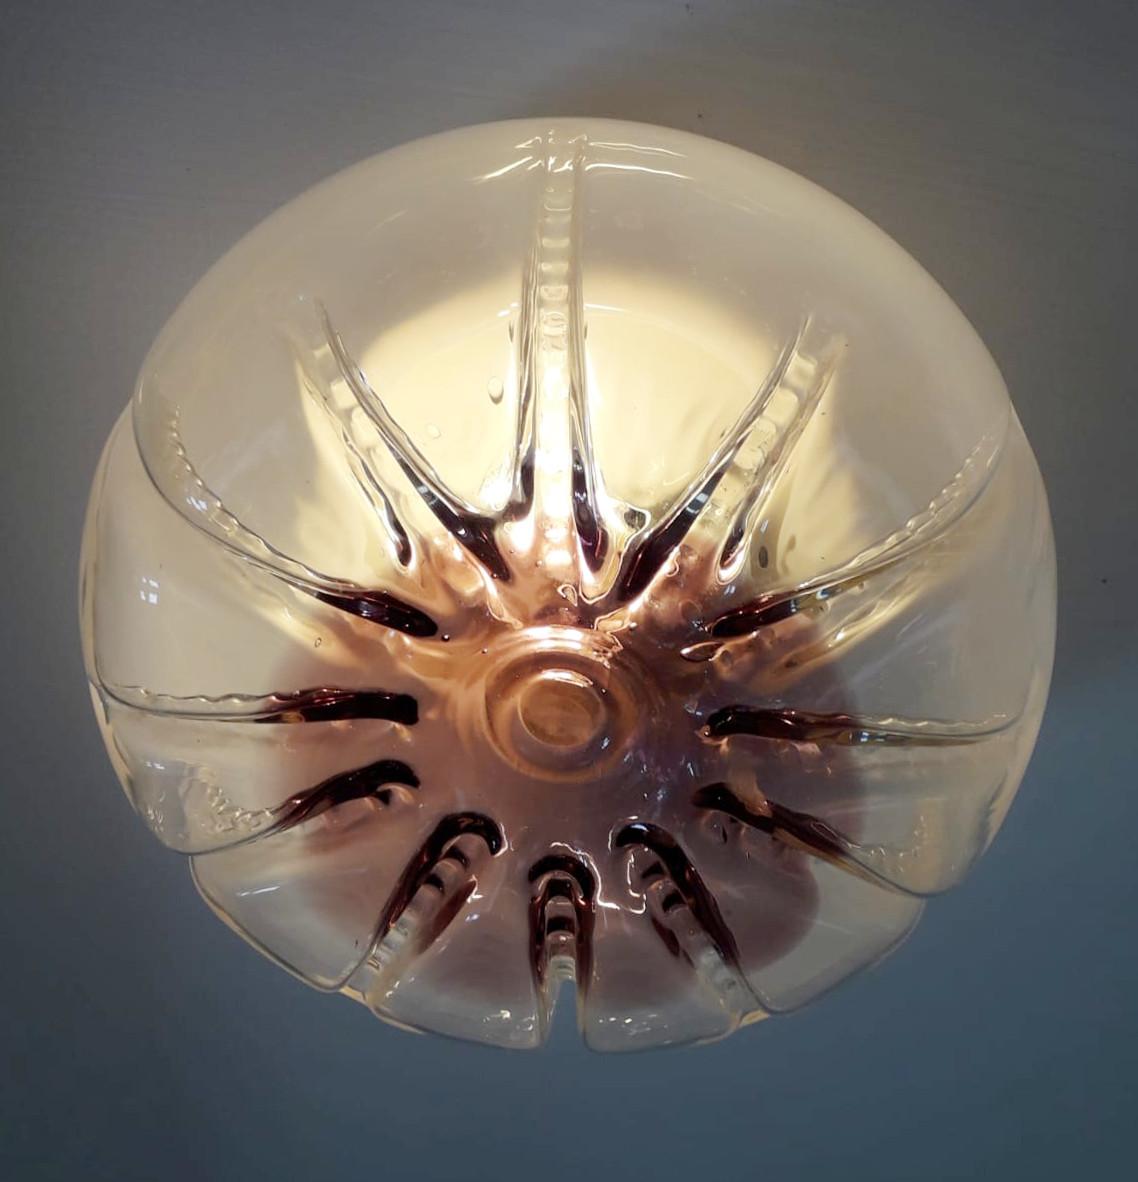 20th Century Amethyst Murano Sconce - 3 available For Sale